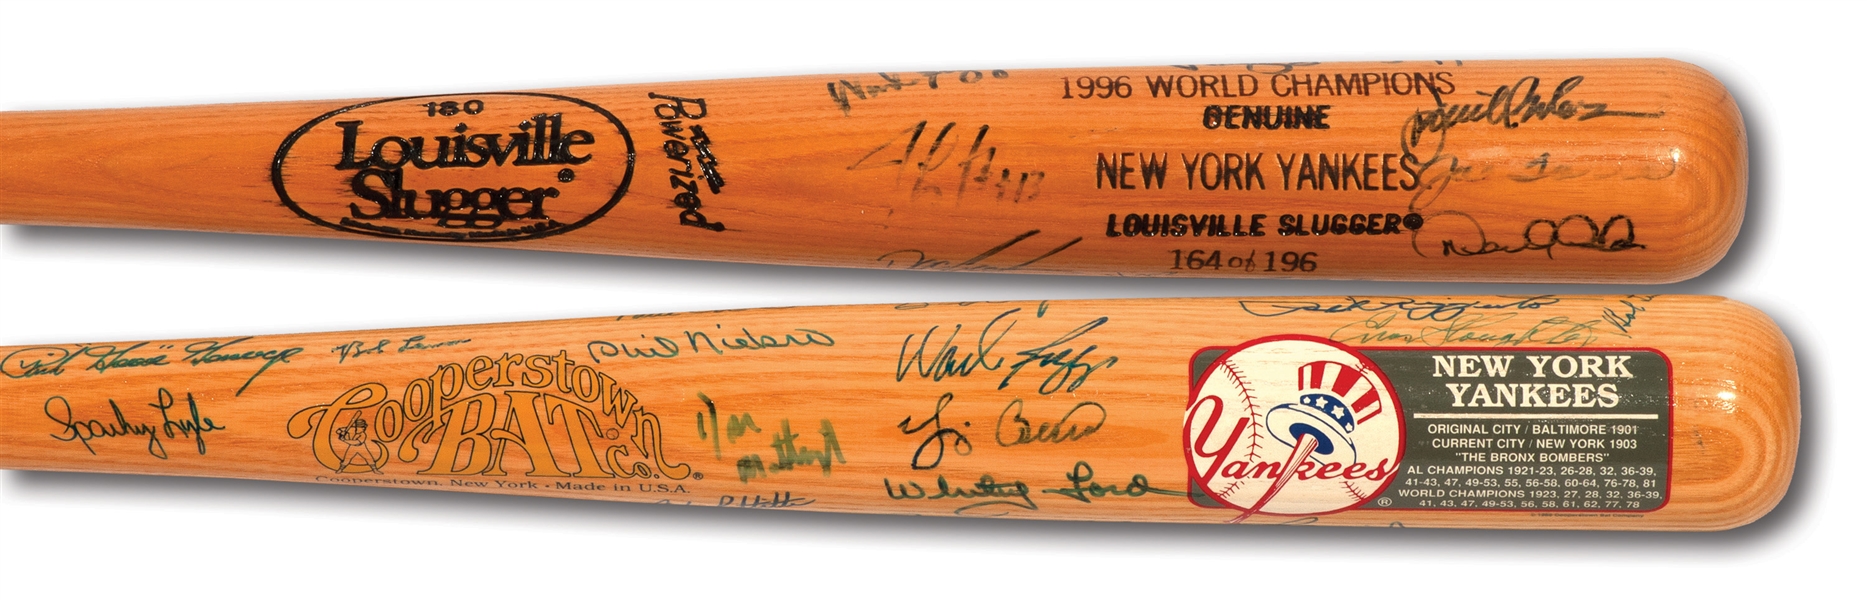 NEW YORK YANKEES PAIR OF MULTI-SIGNED BATS INCL. 1996 TEAM AND ALL-TIME GREATS (PINSTRIPE DYNASTY COLLECTION)